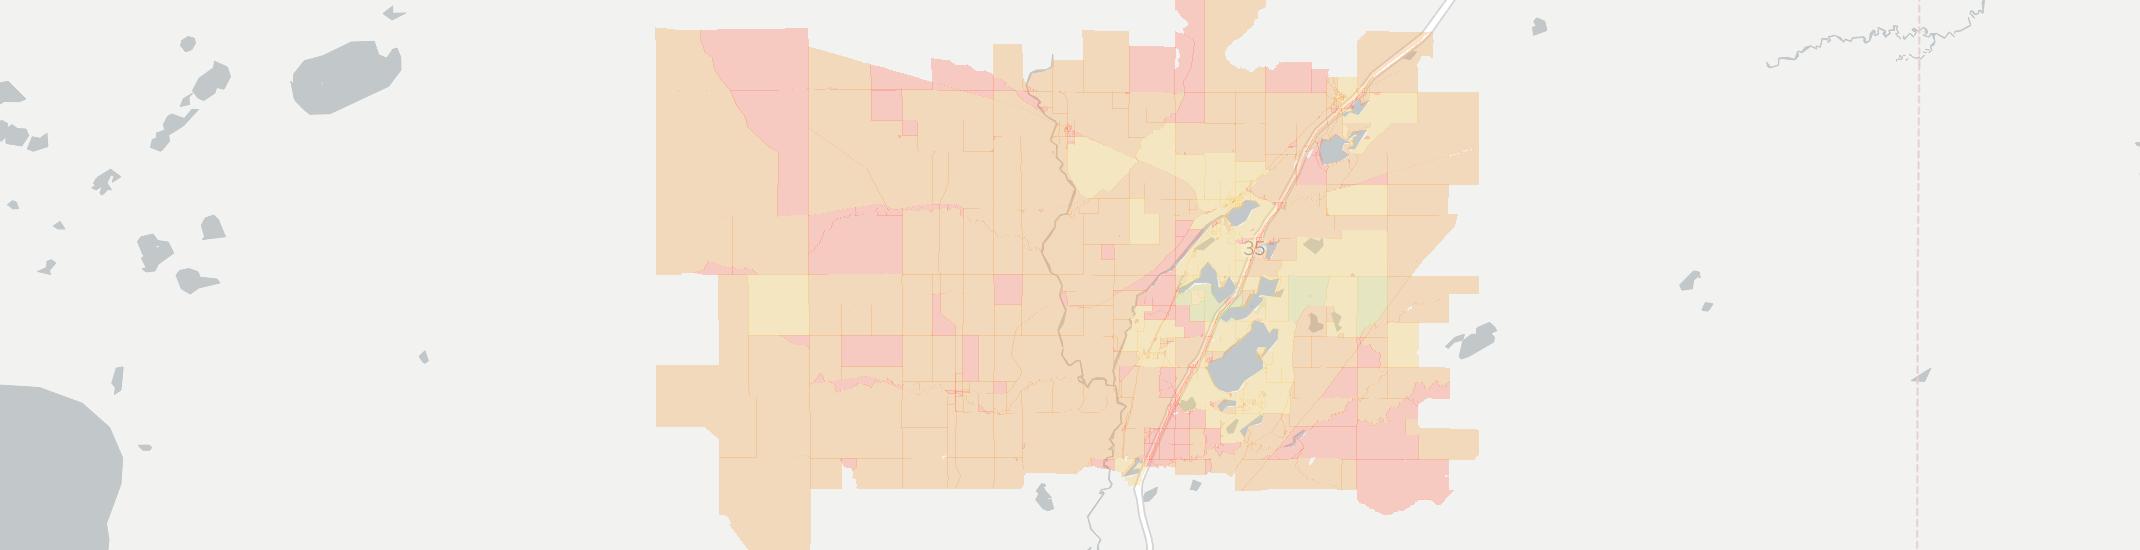 Sturgeon Lake Internet Competition Map. Click for interactive map.